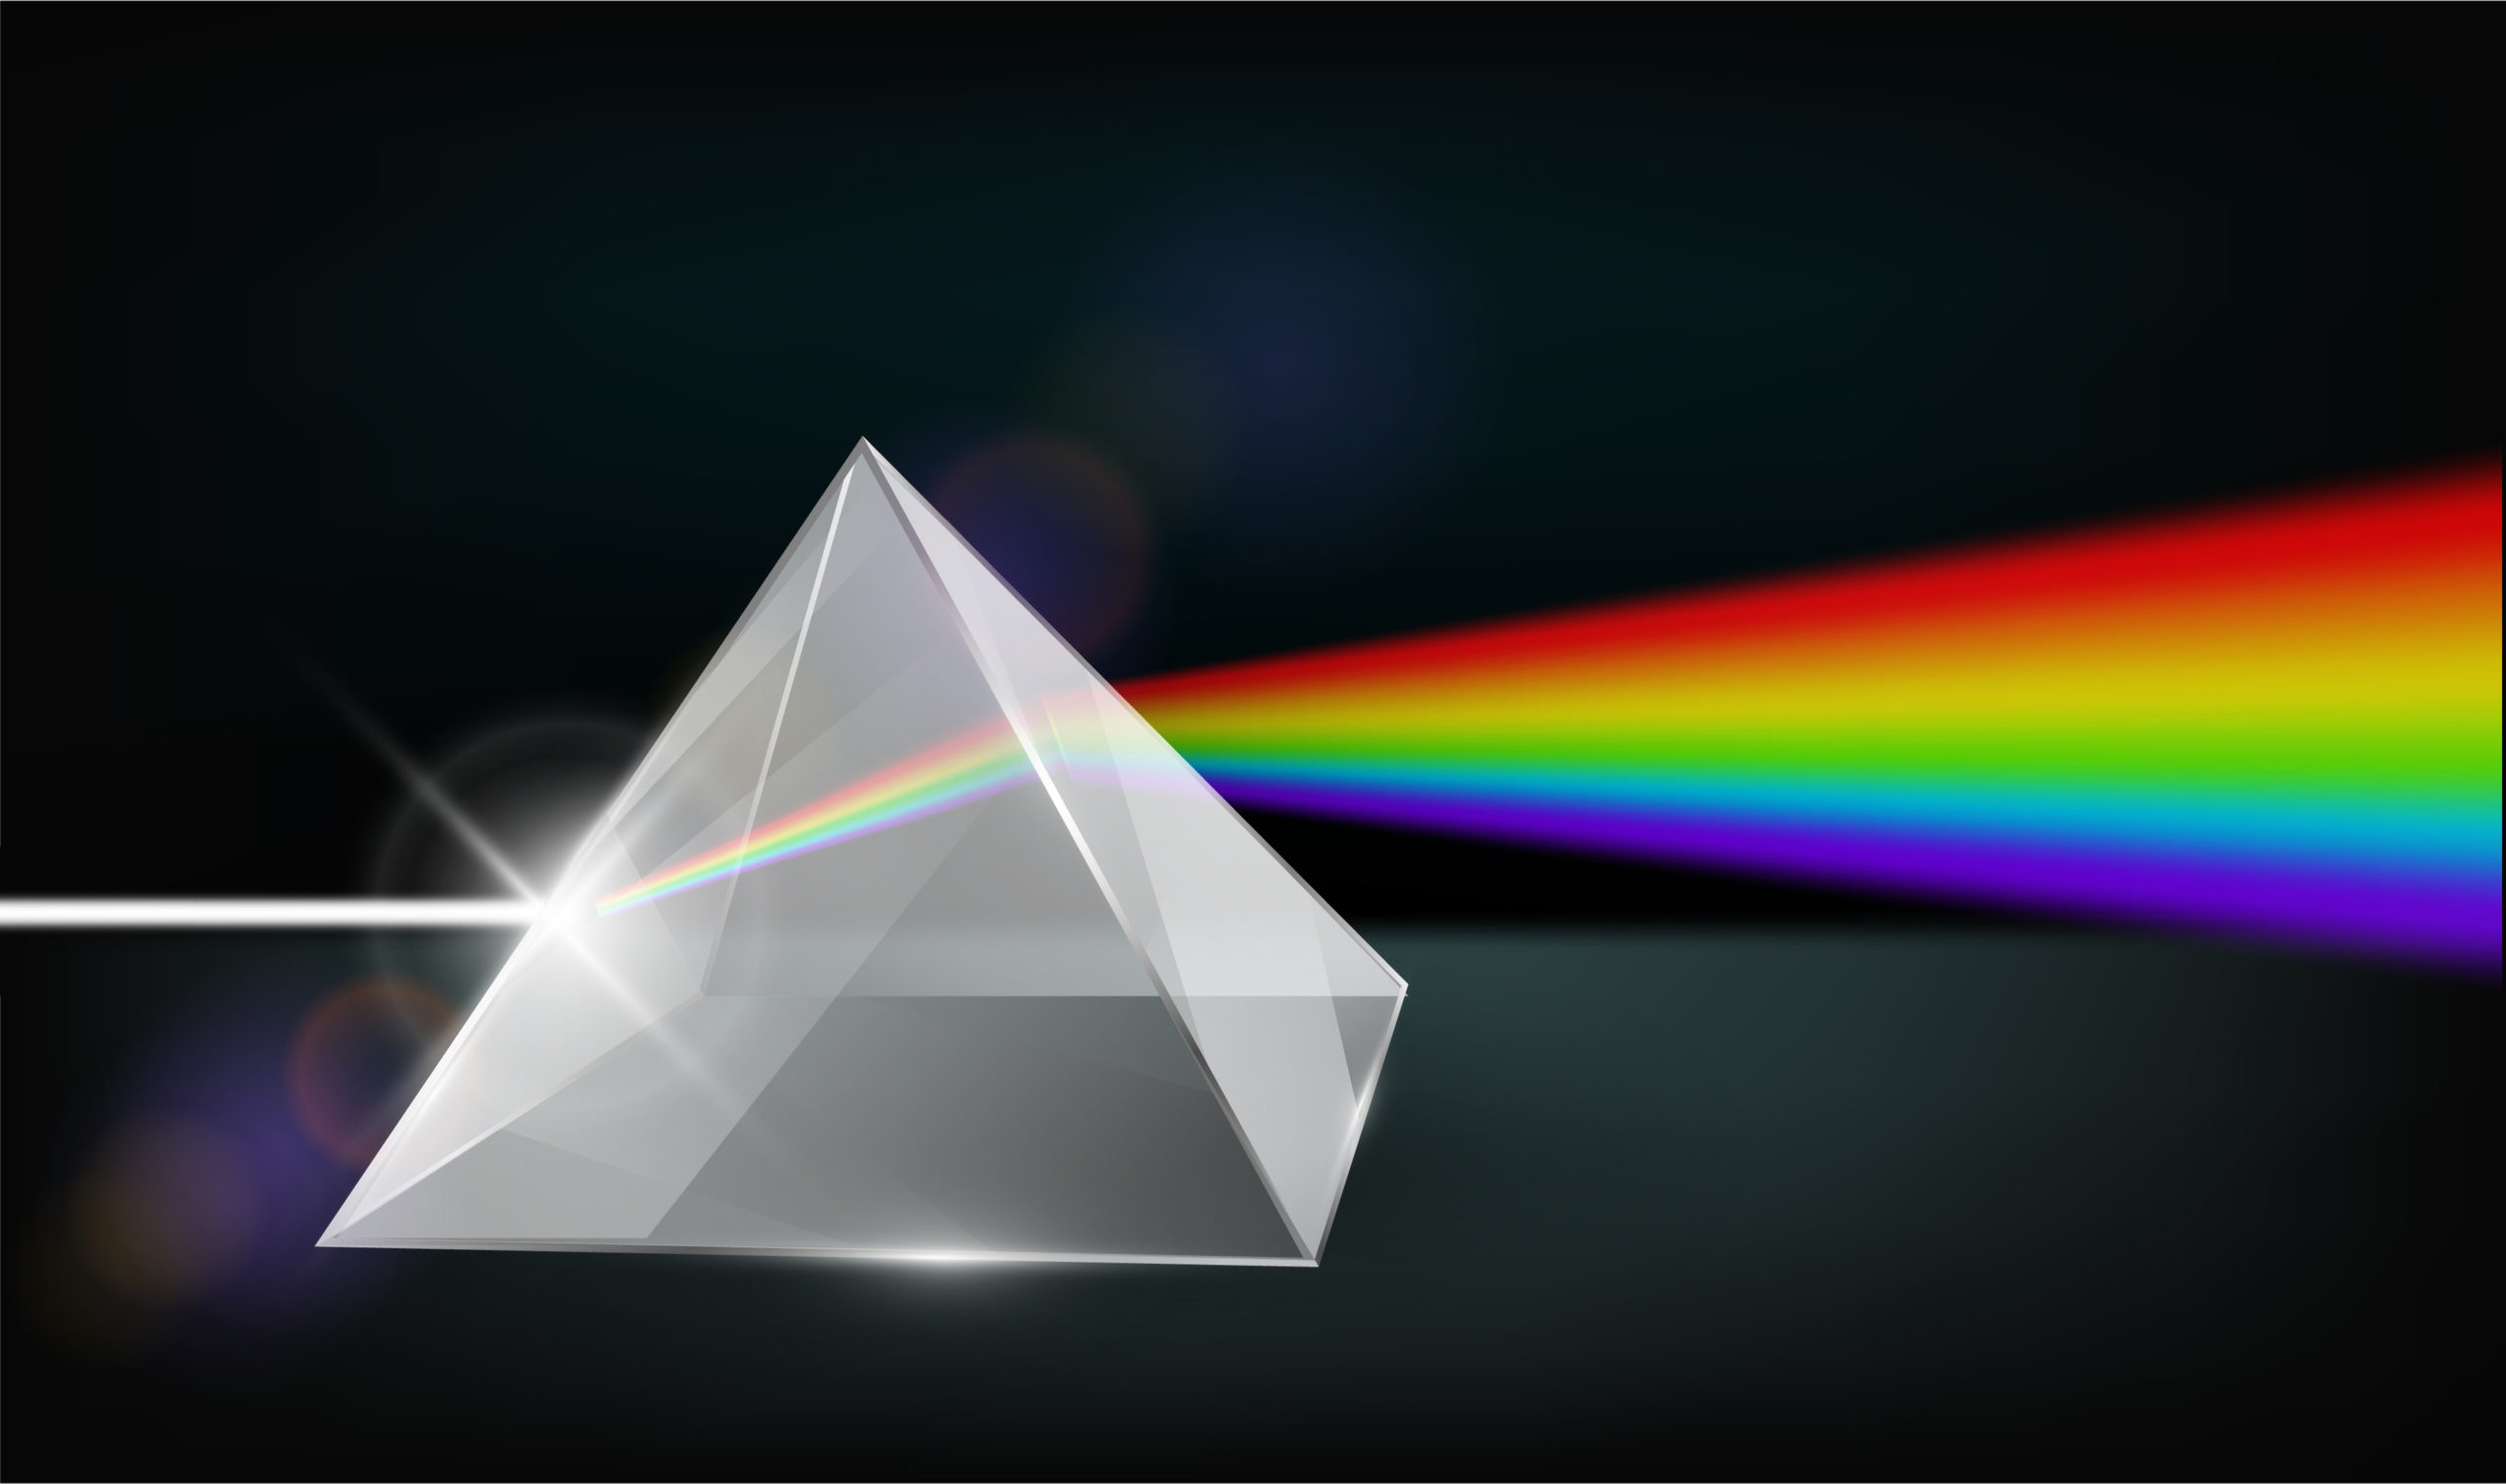 How to Make a Rainbow with a Prism - Science Questions for Kids